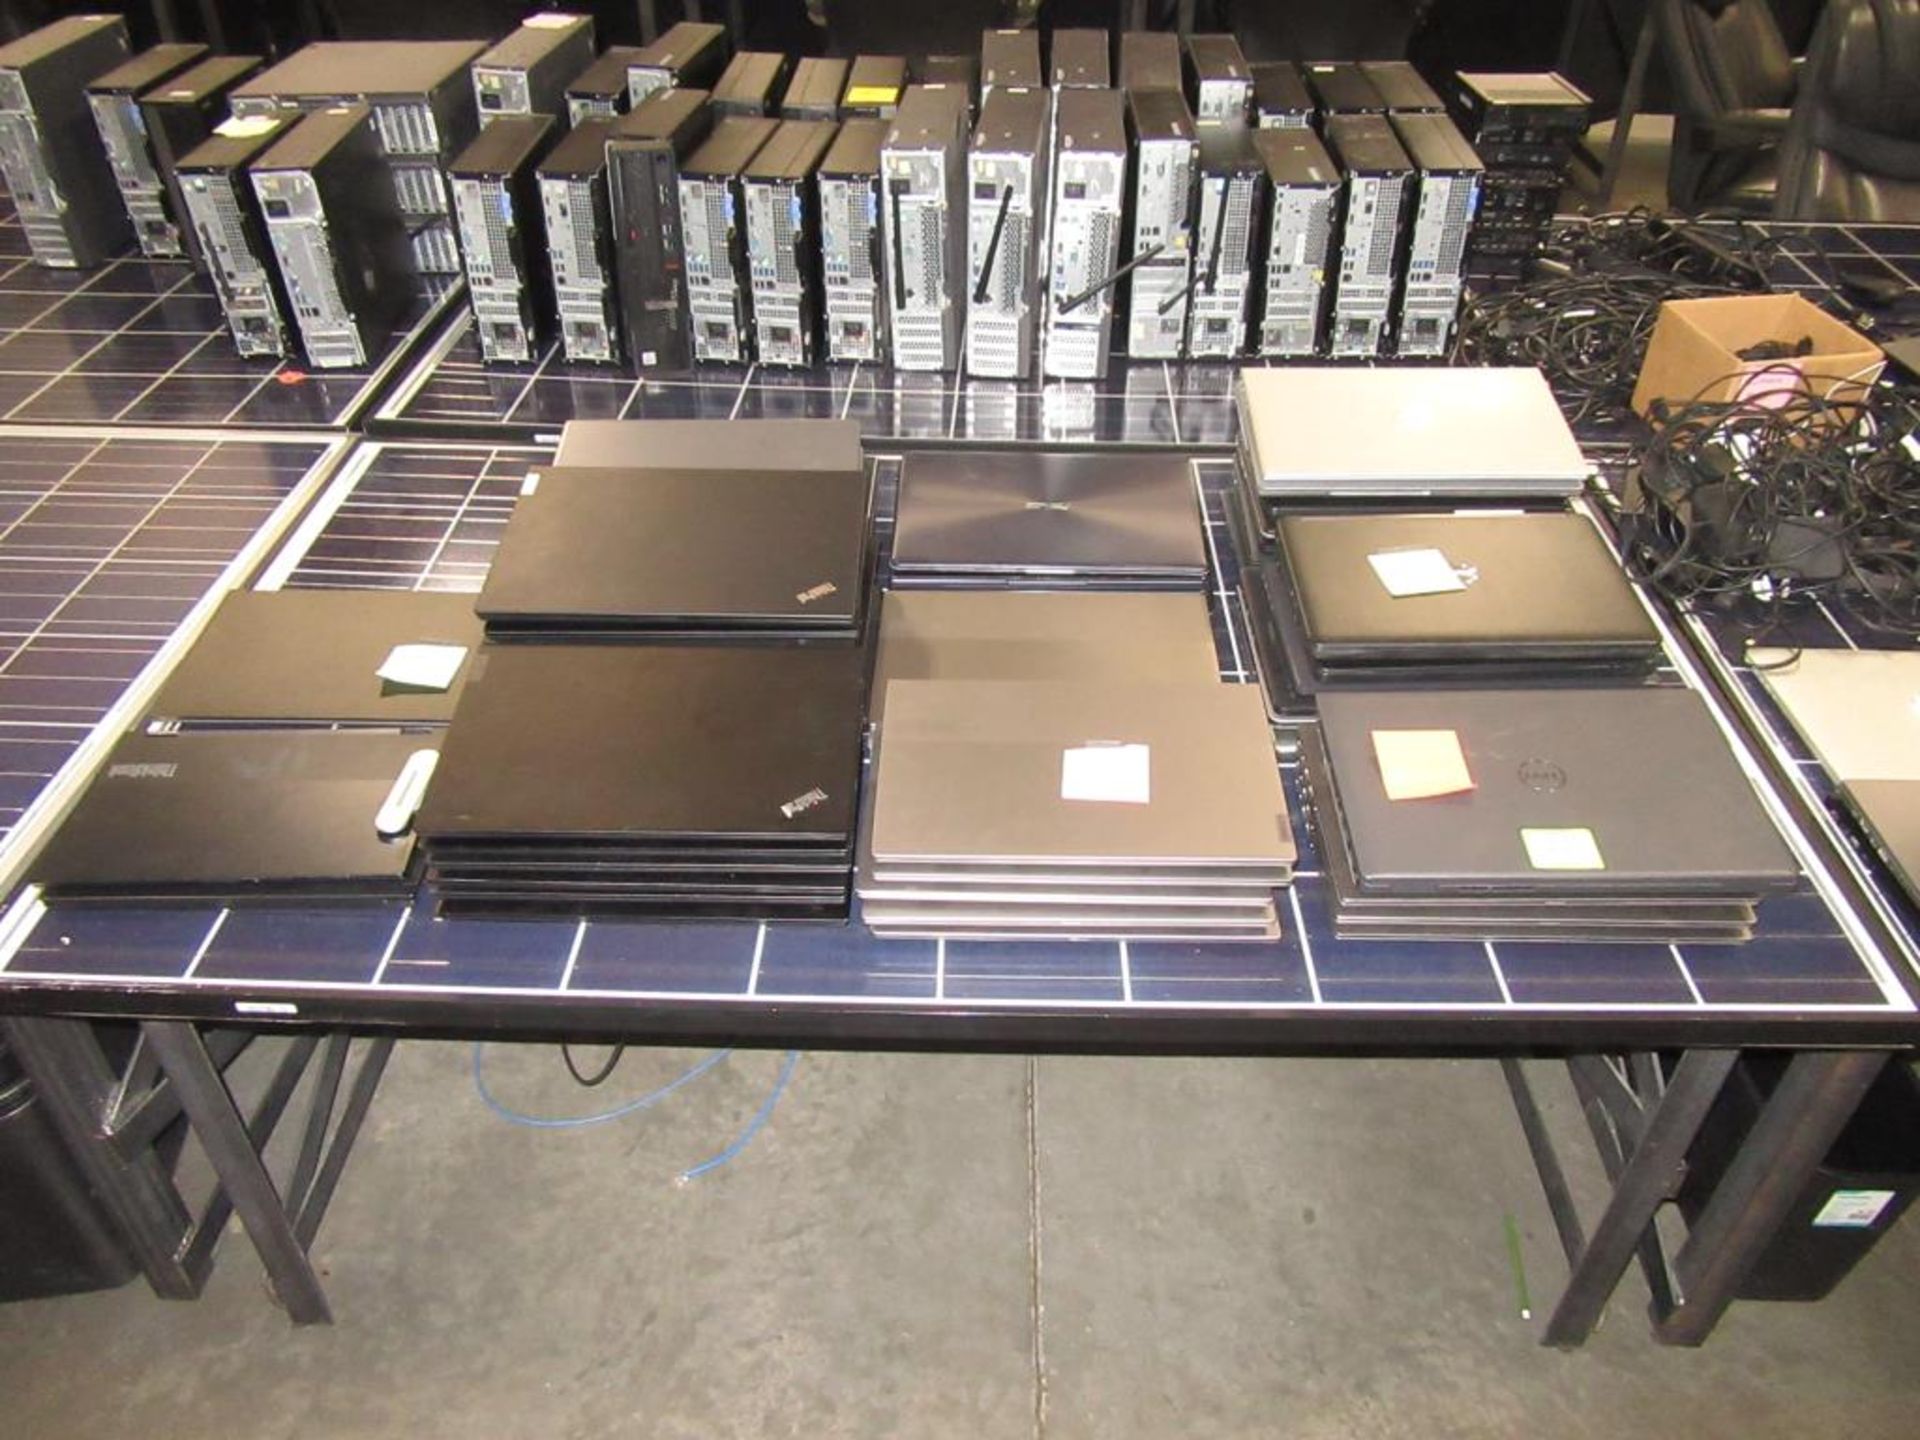 Laptop Computers, Tablets & Accessories - Image 2 of 8